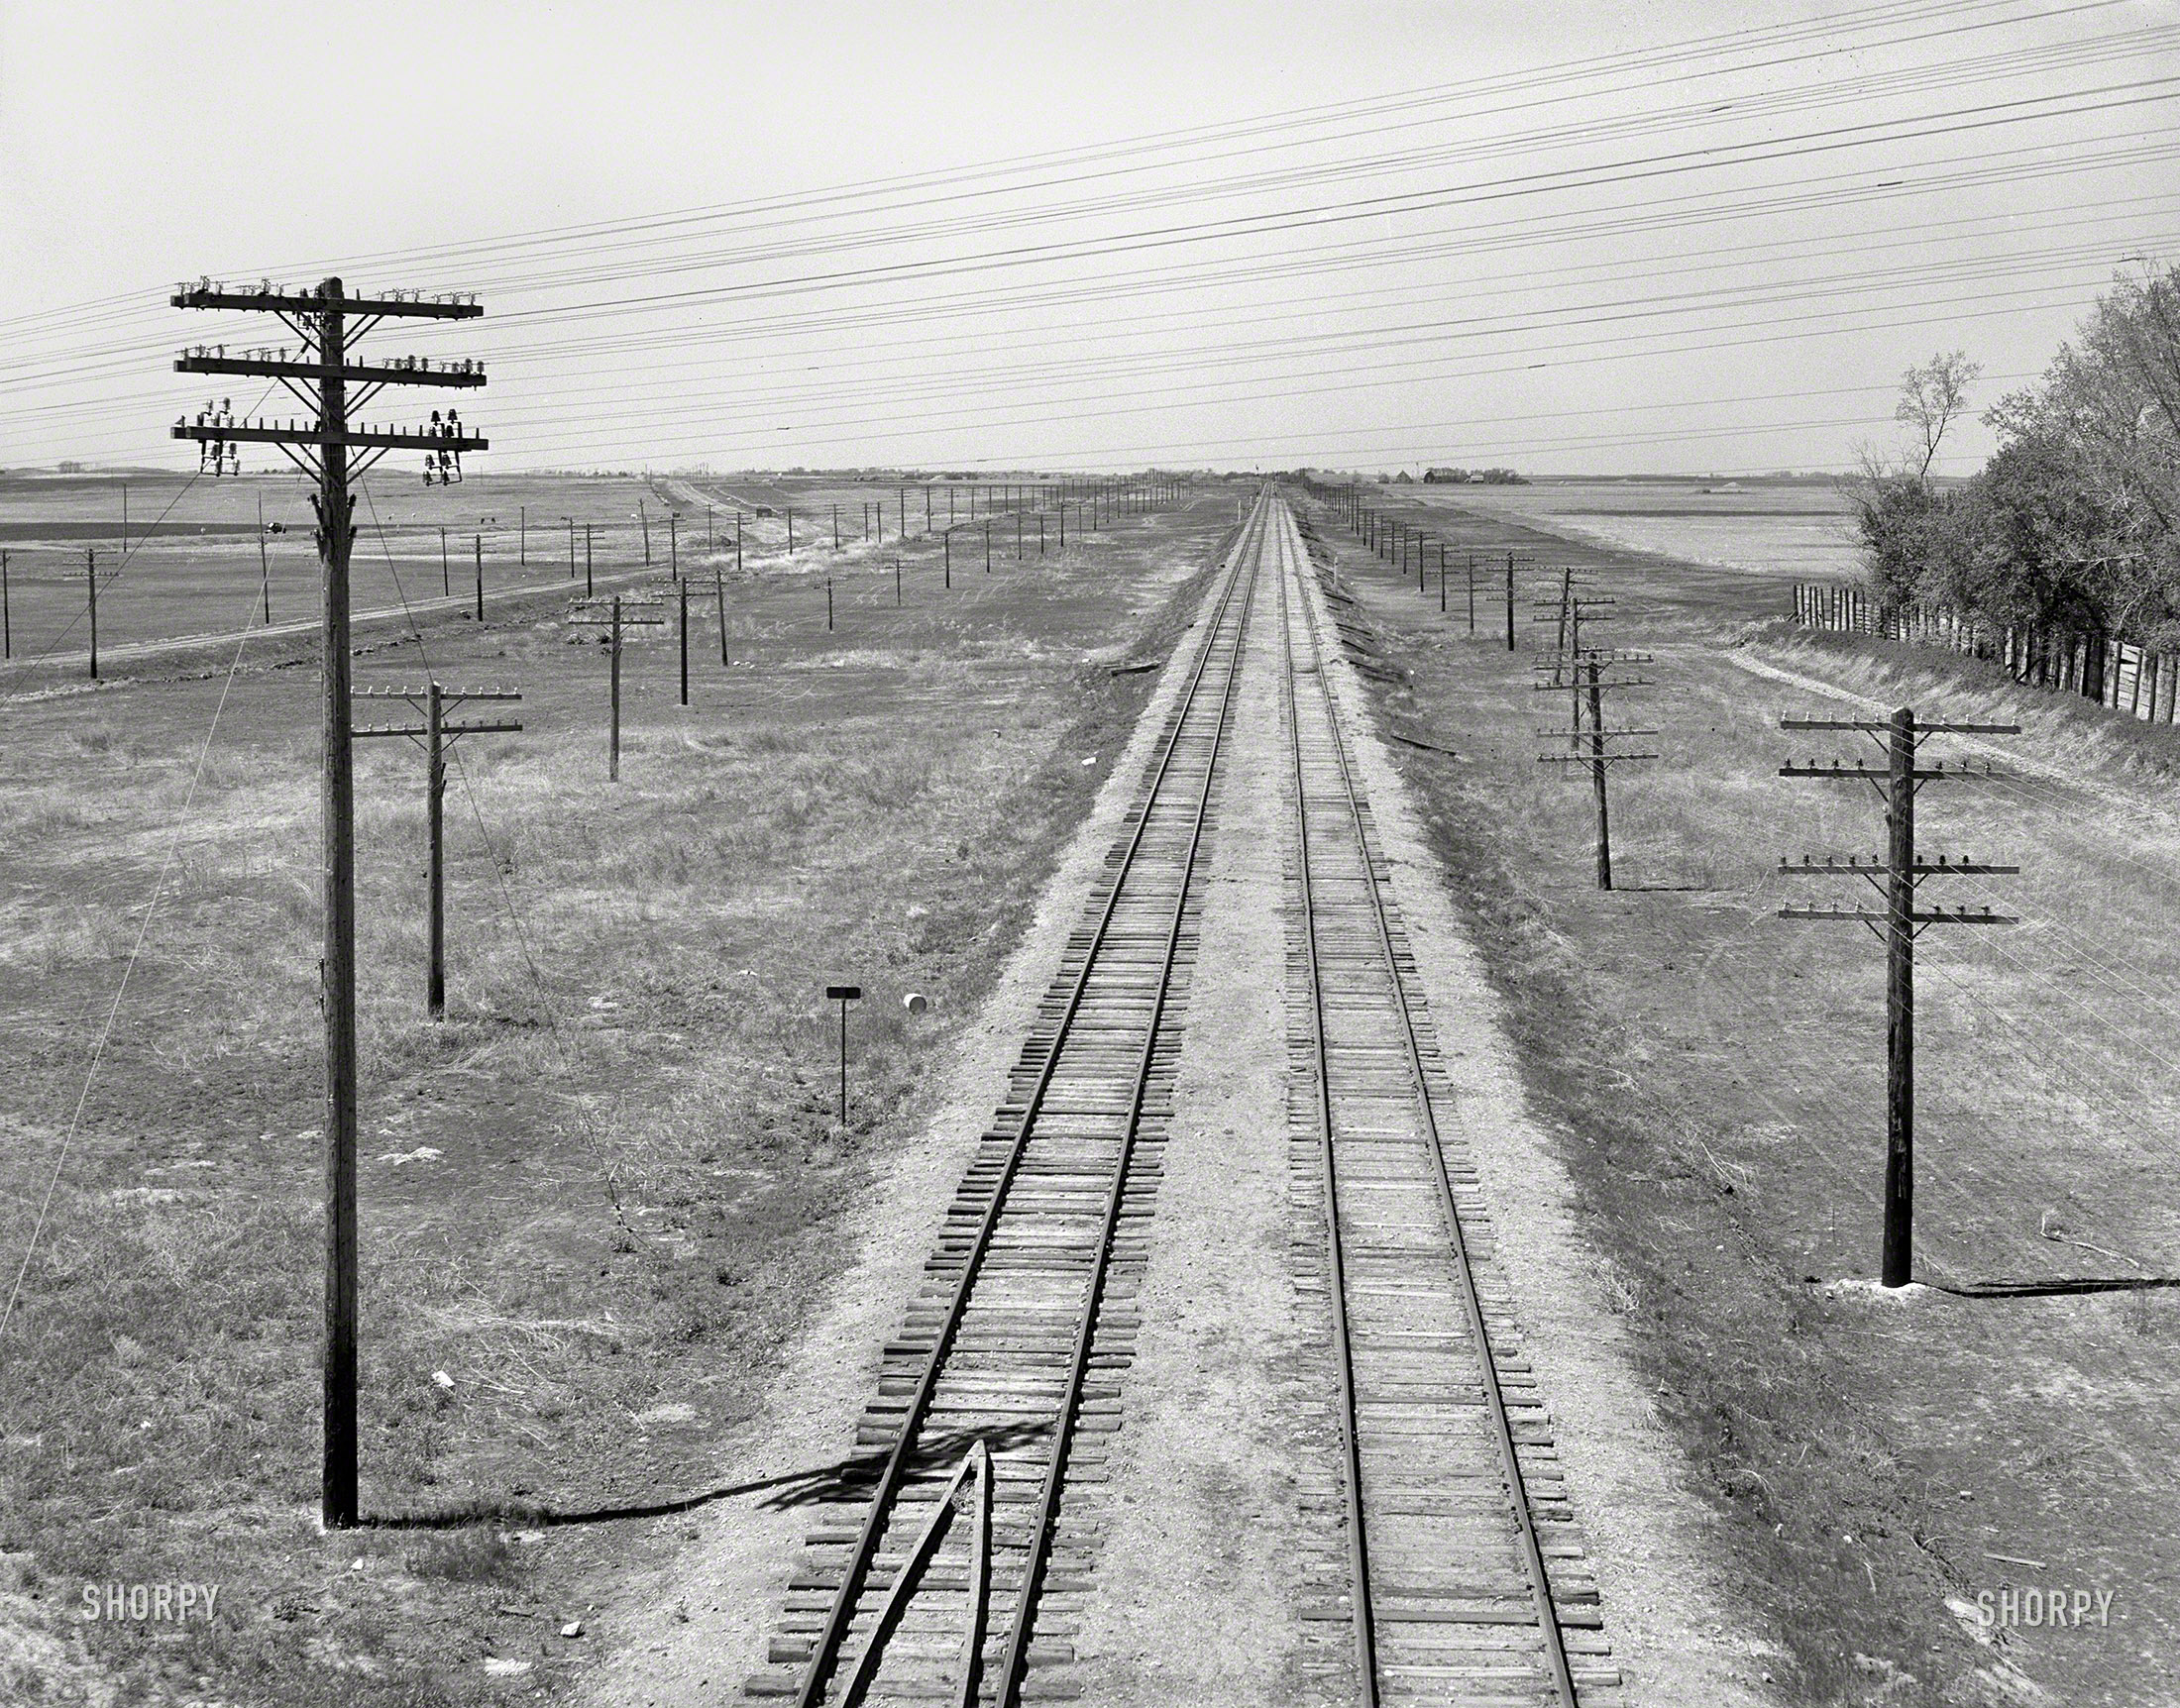 July 1939. "Northern Pacific railroad tracks west of Fargo, North Dakota." Photo by Arthur Rothstein for the Farm Security Administration. View full size.